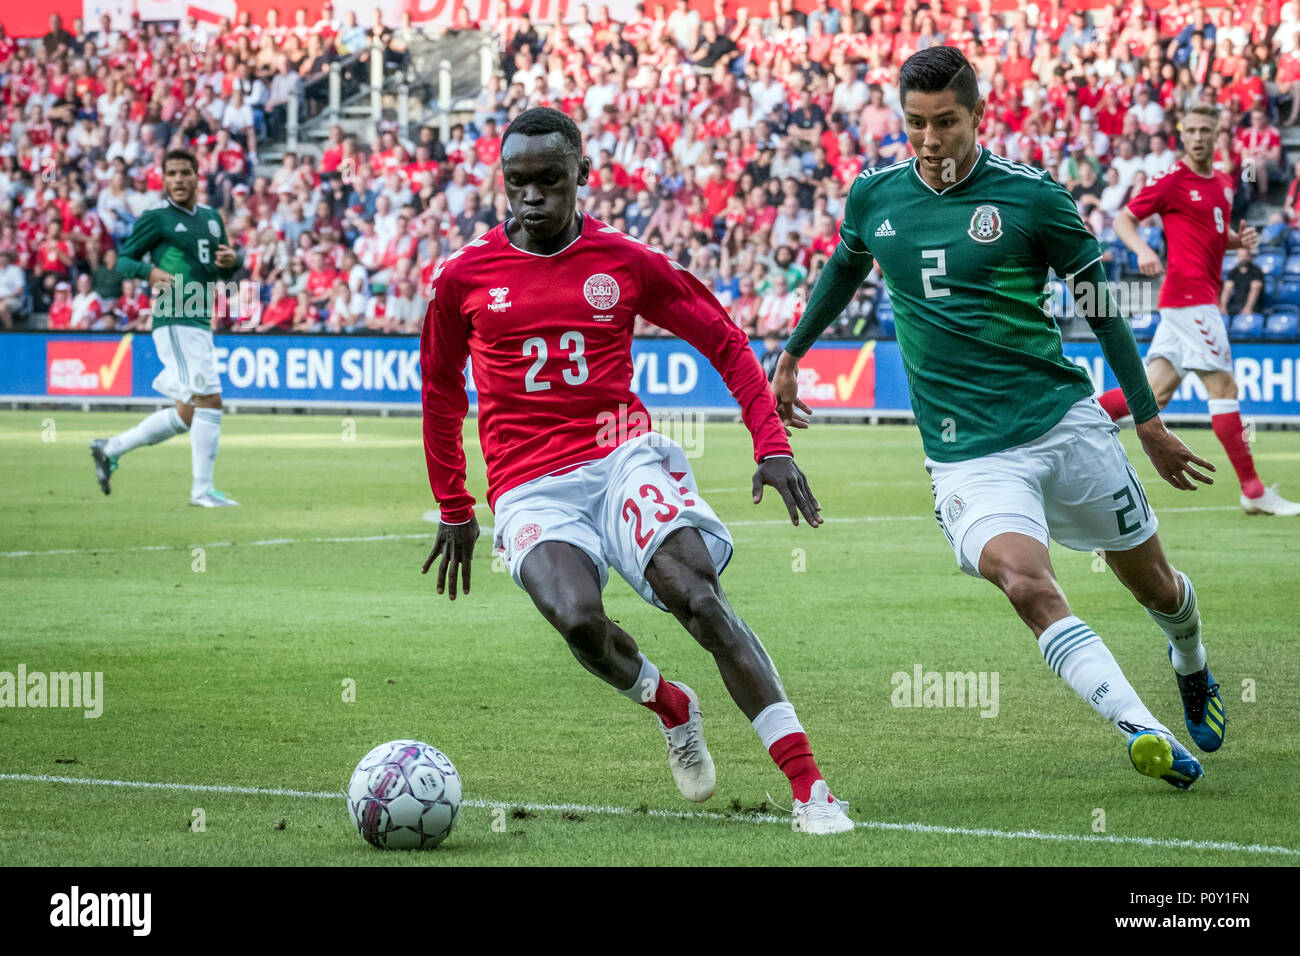 Denmark, Brøndby - June 09, 2018. Pione Sisto (23) of Denmark is followed by Hugo Ayala Castro (2) of Mexico during the football friendly between Denmark and Mexico at Brøndby Stadion. (Photo credit: Gonzales Photo - Kim M. Leland). Credit: Gonzales Photo/Alamy Live News Stock Photo